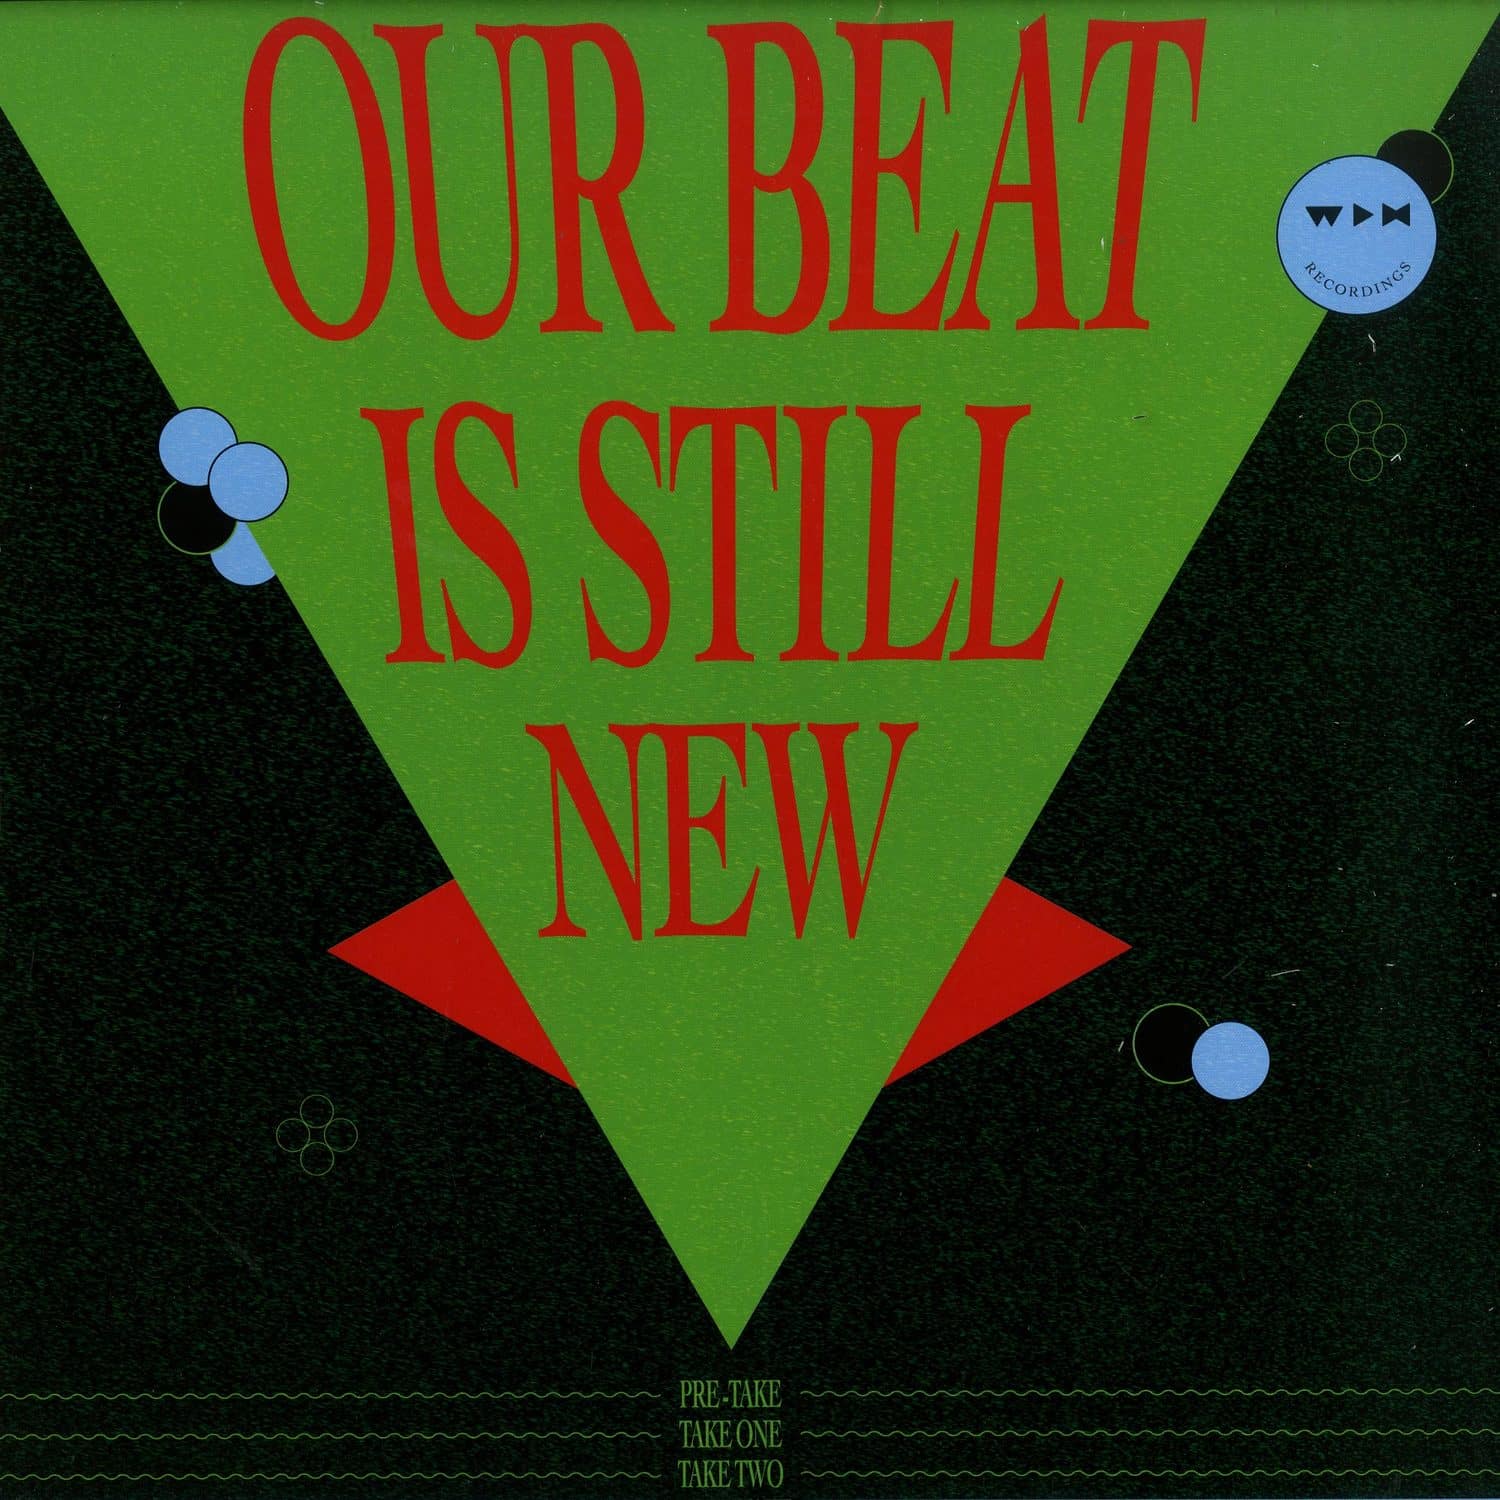 Various Artists - OUR BEAT IS STILL NEW - AFTER TAKE